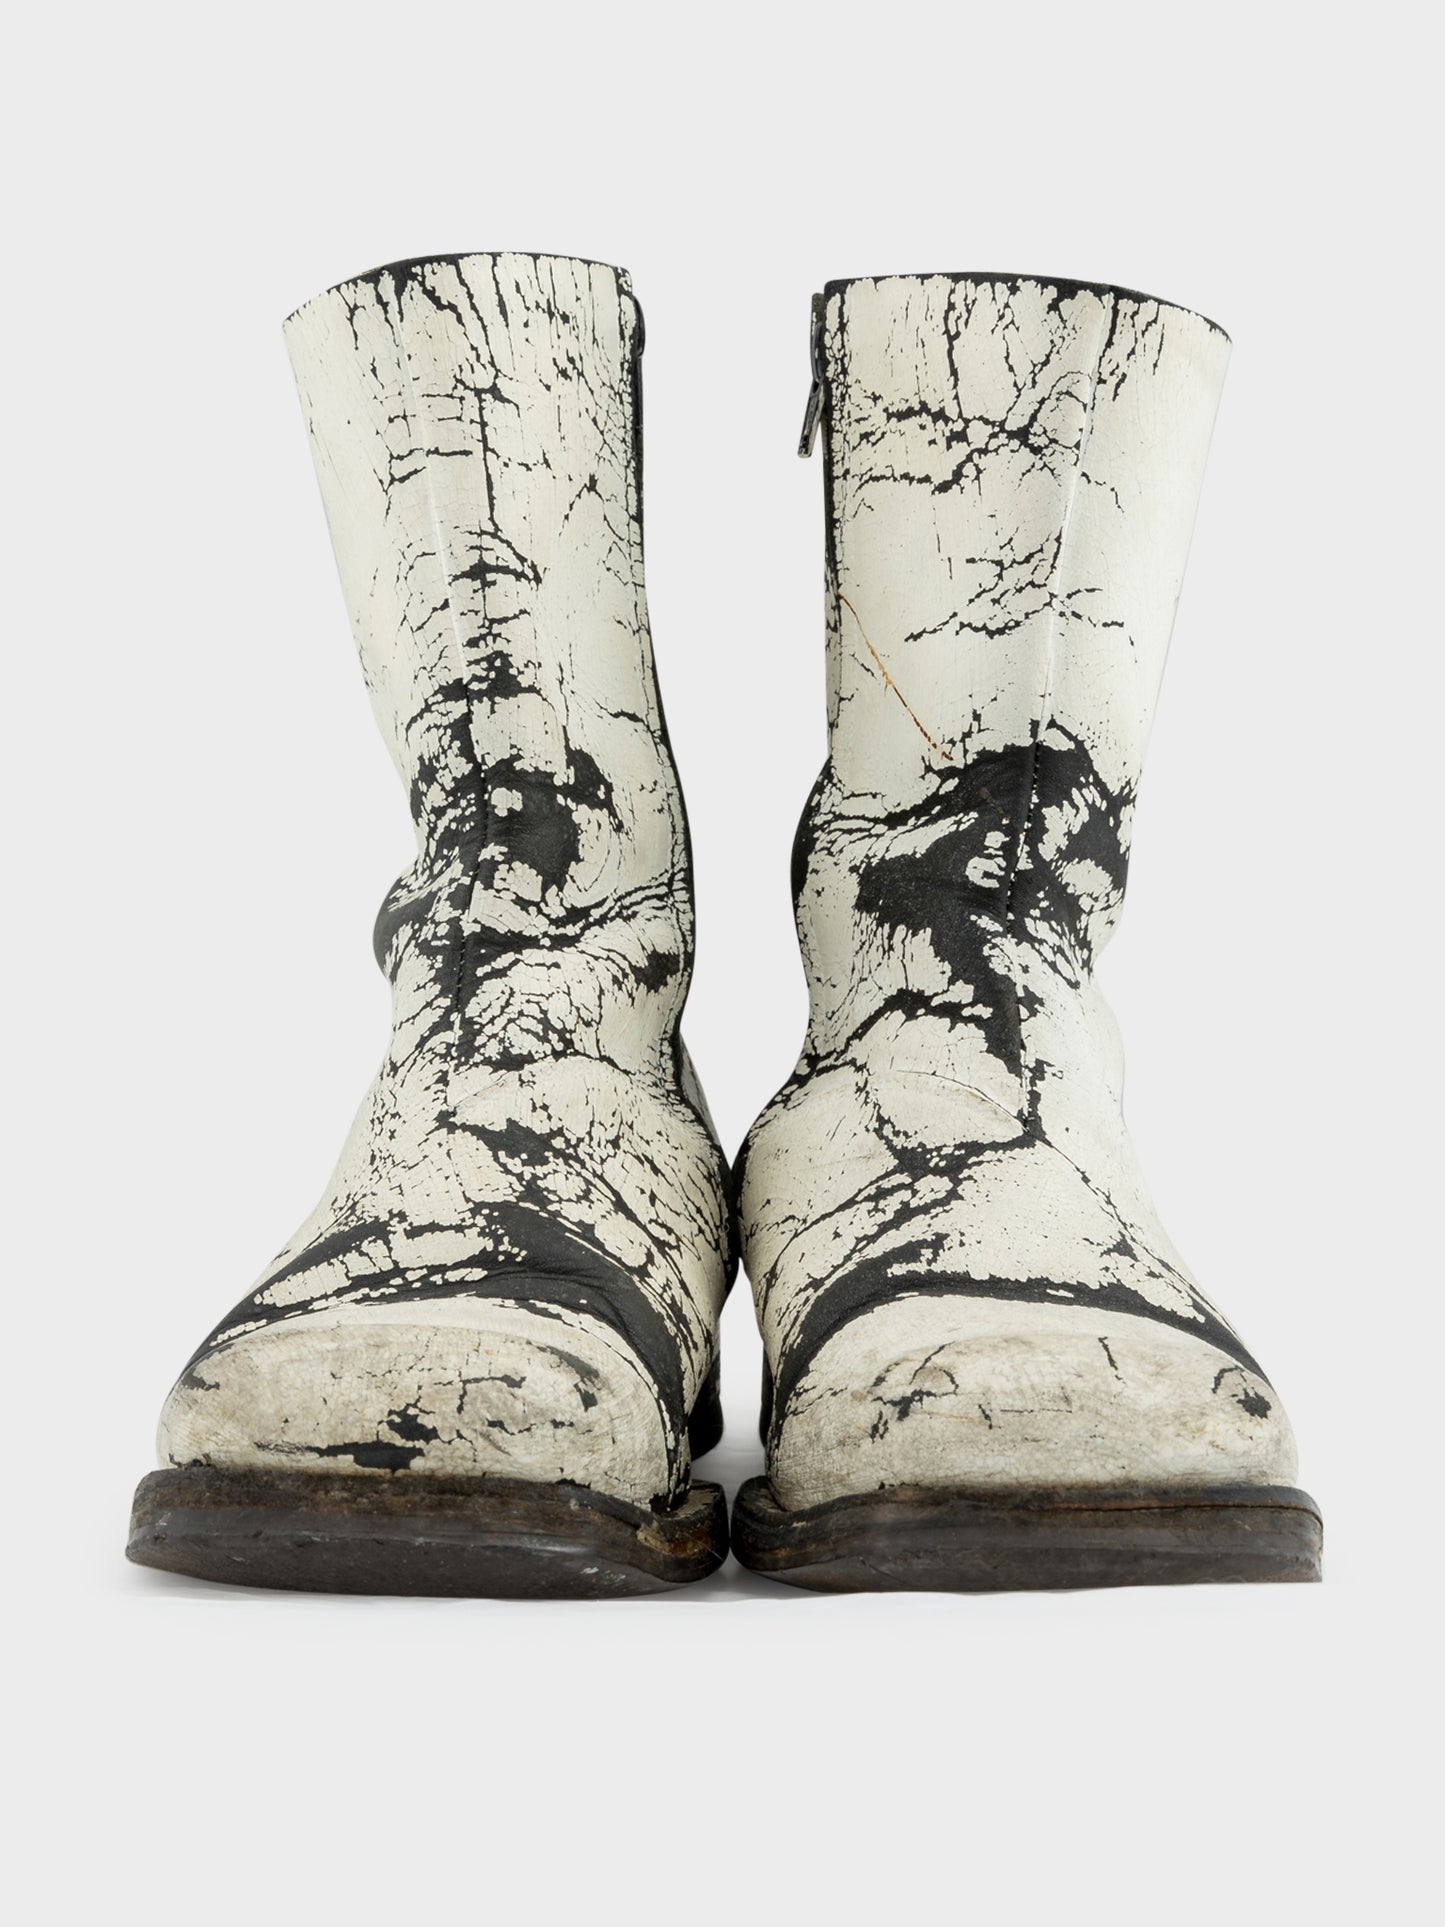 Cracked Painted Boots